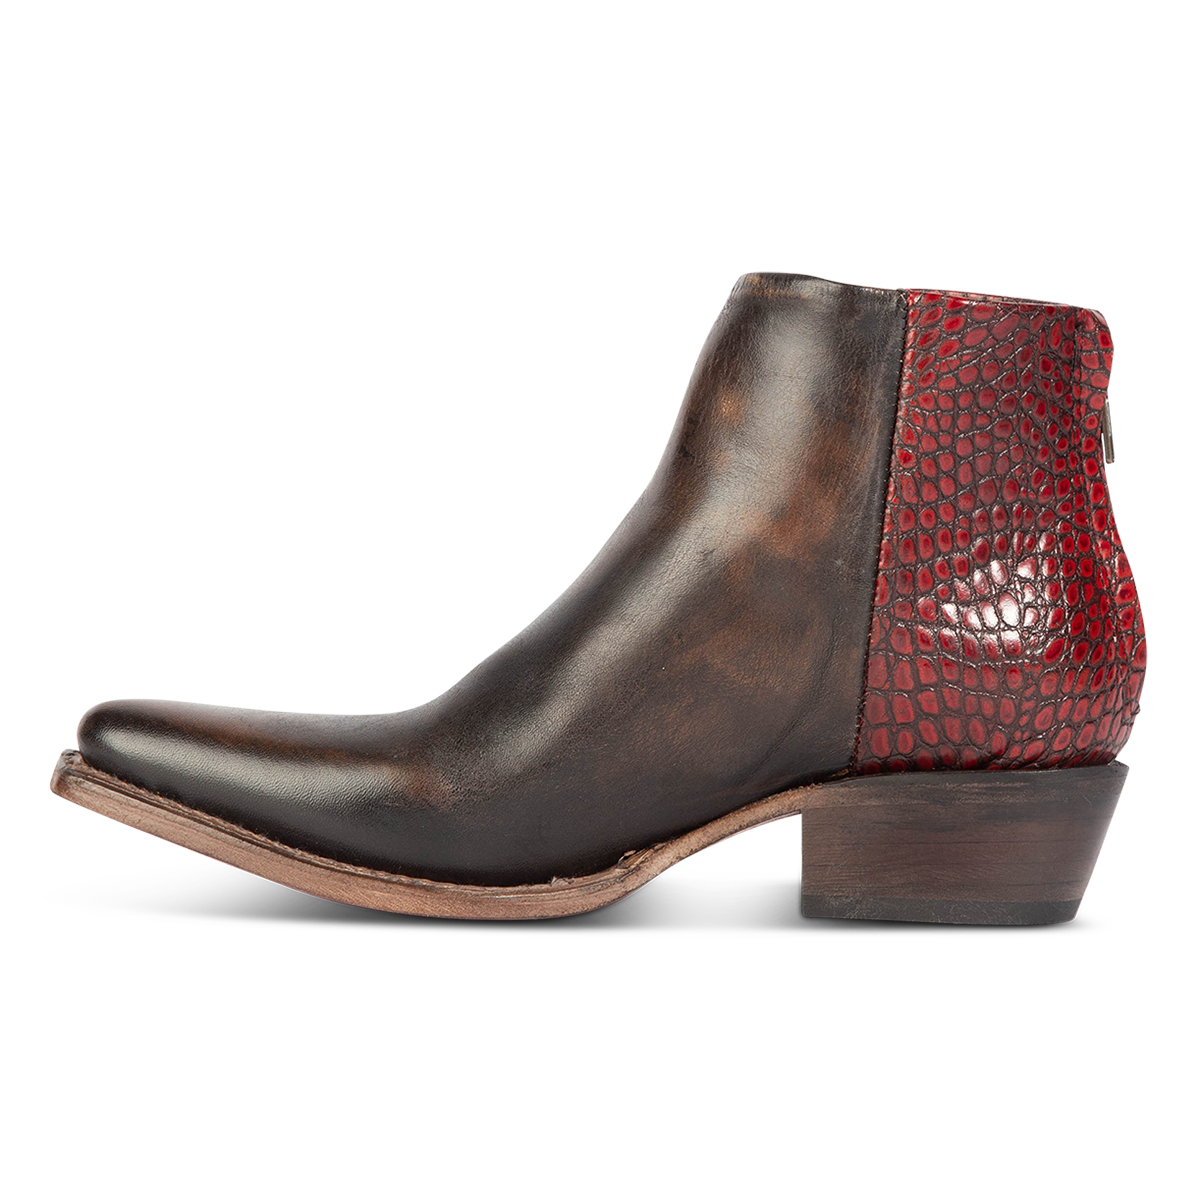 Inside view showing contrasting leather and wooden heel on FREEBIRD women's Rule red croco multi leather bootie